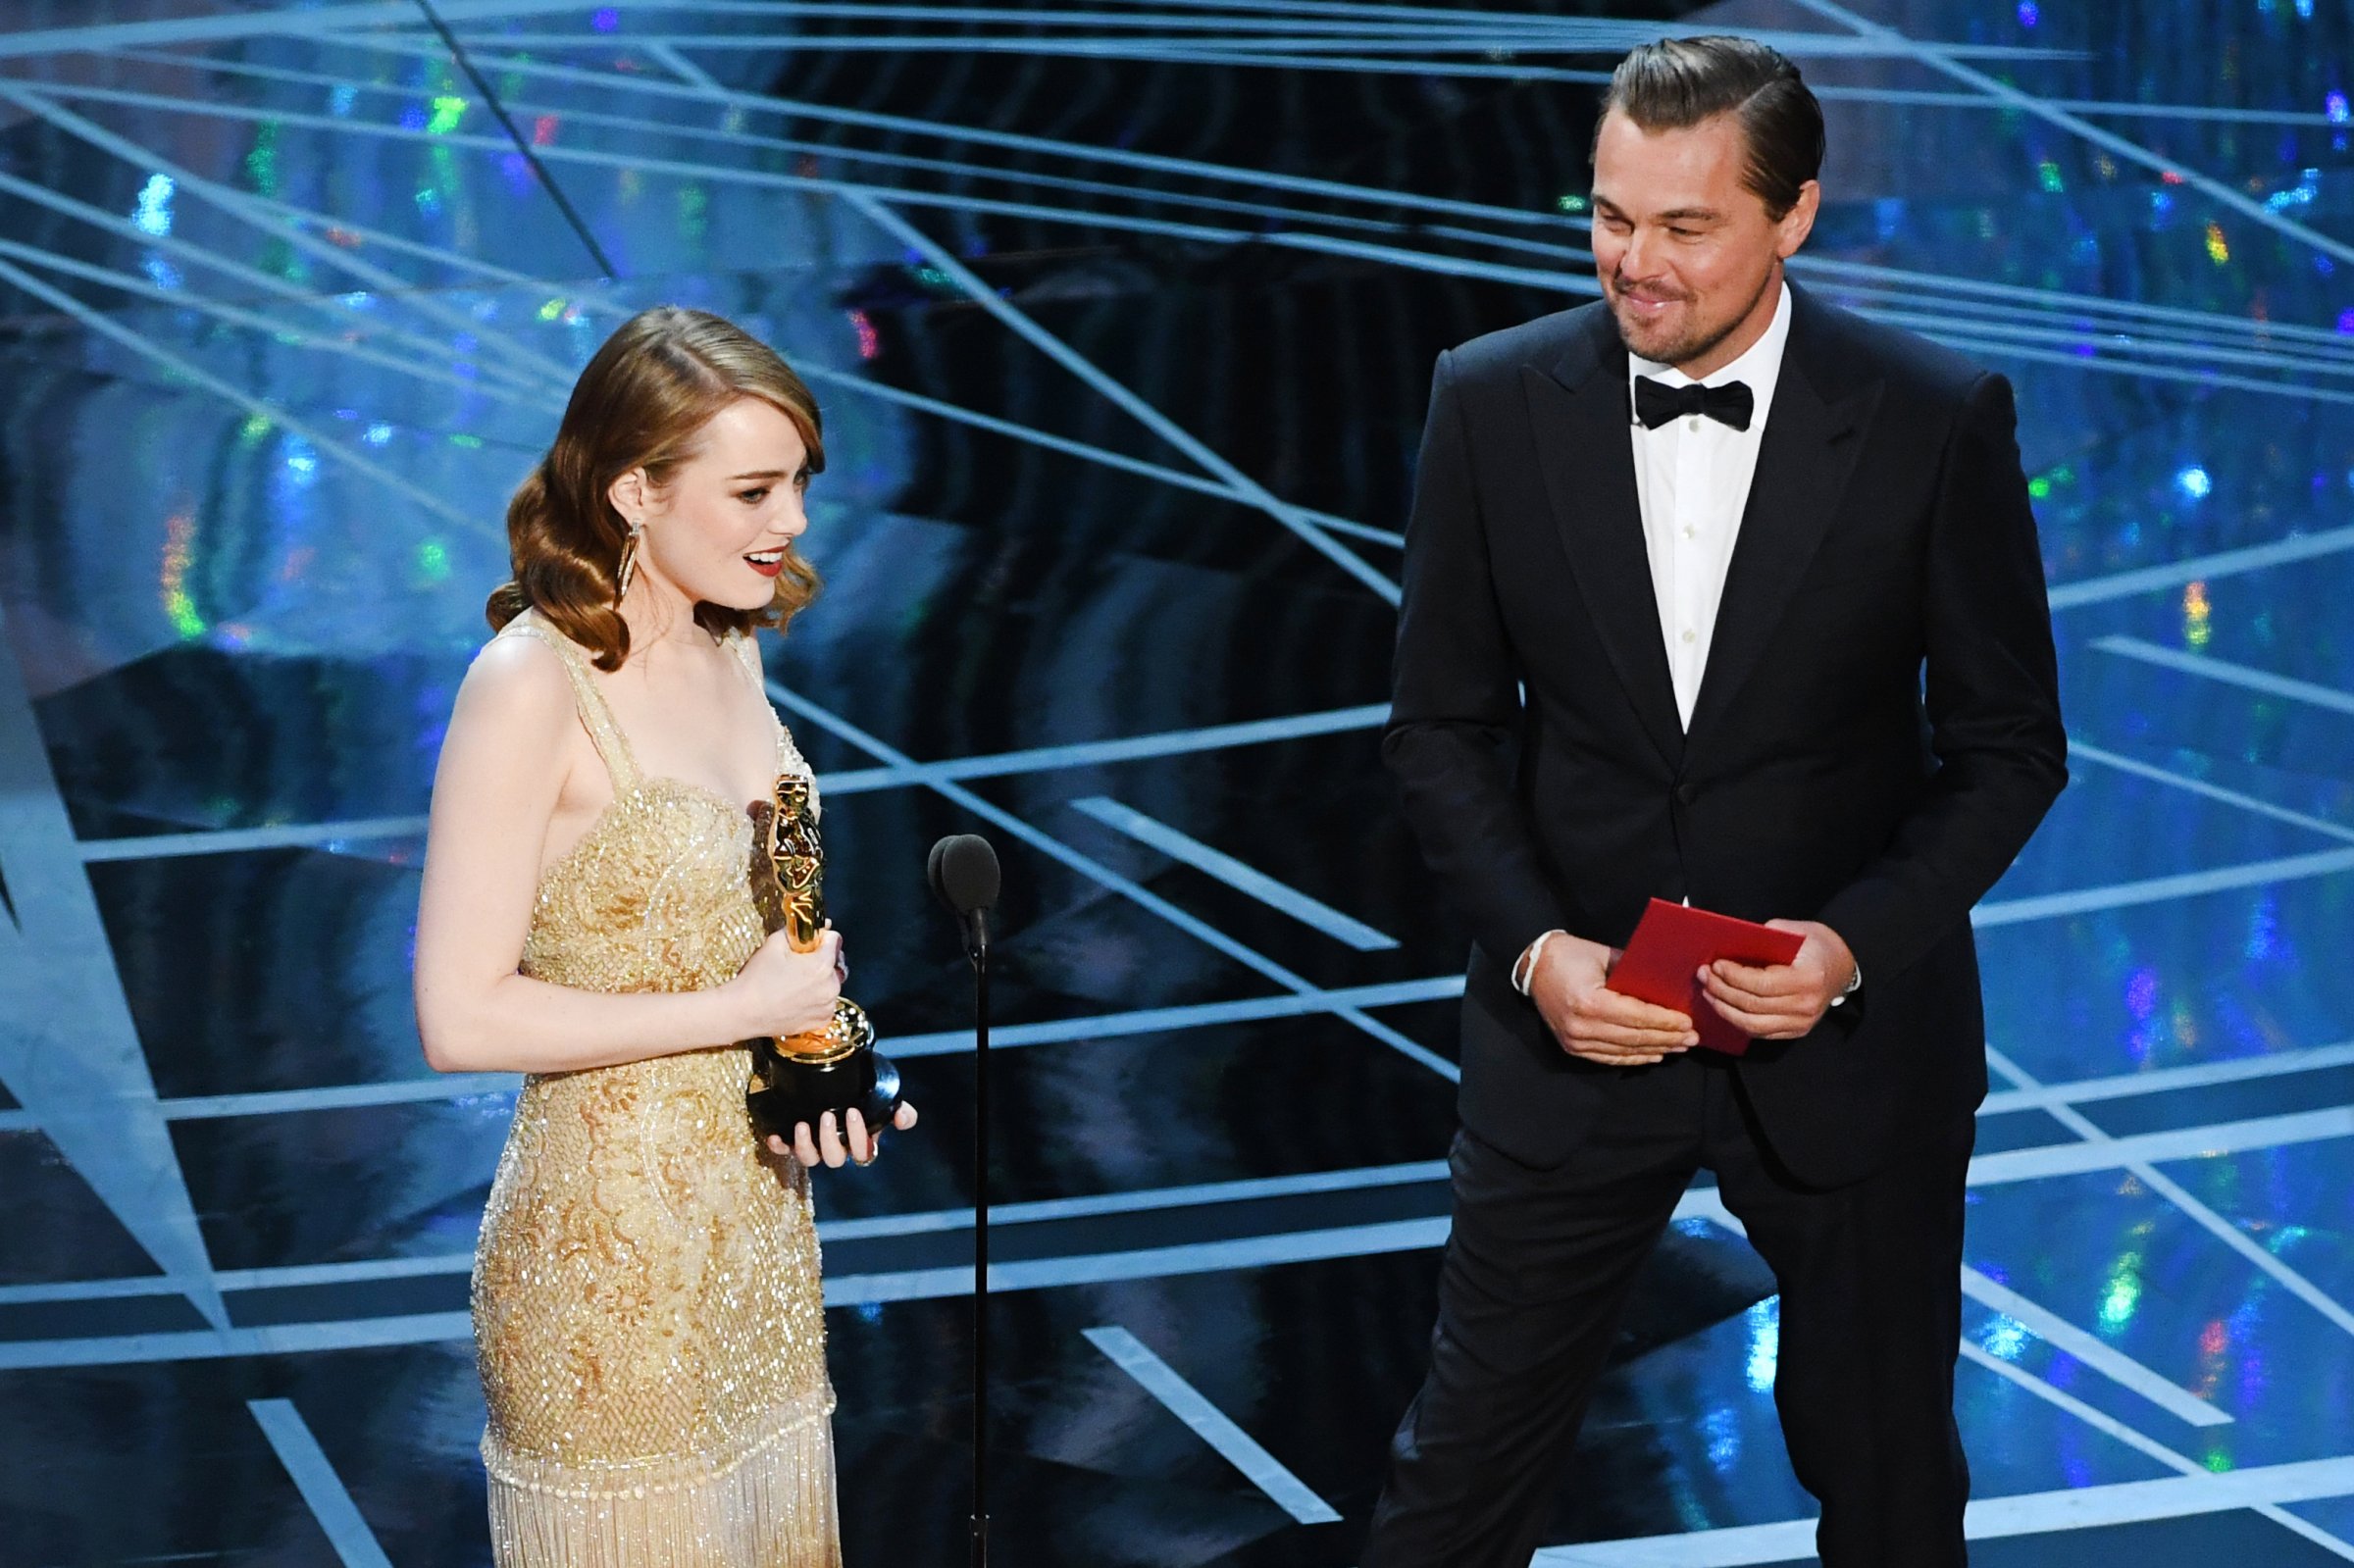 Emma Stone accepts Best Actress for La La Land from Leonardo DiCaprio during the 89th Annual Academy Awards, on Feb. 26, 2017 in Hollywood, Calif.